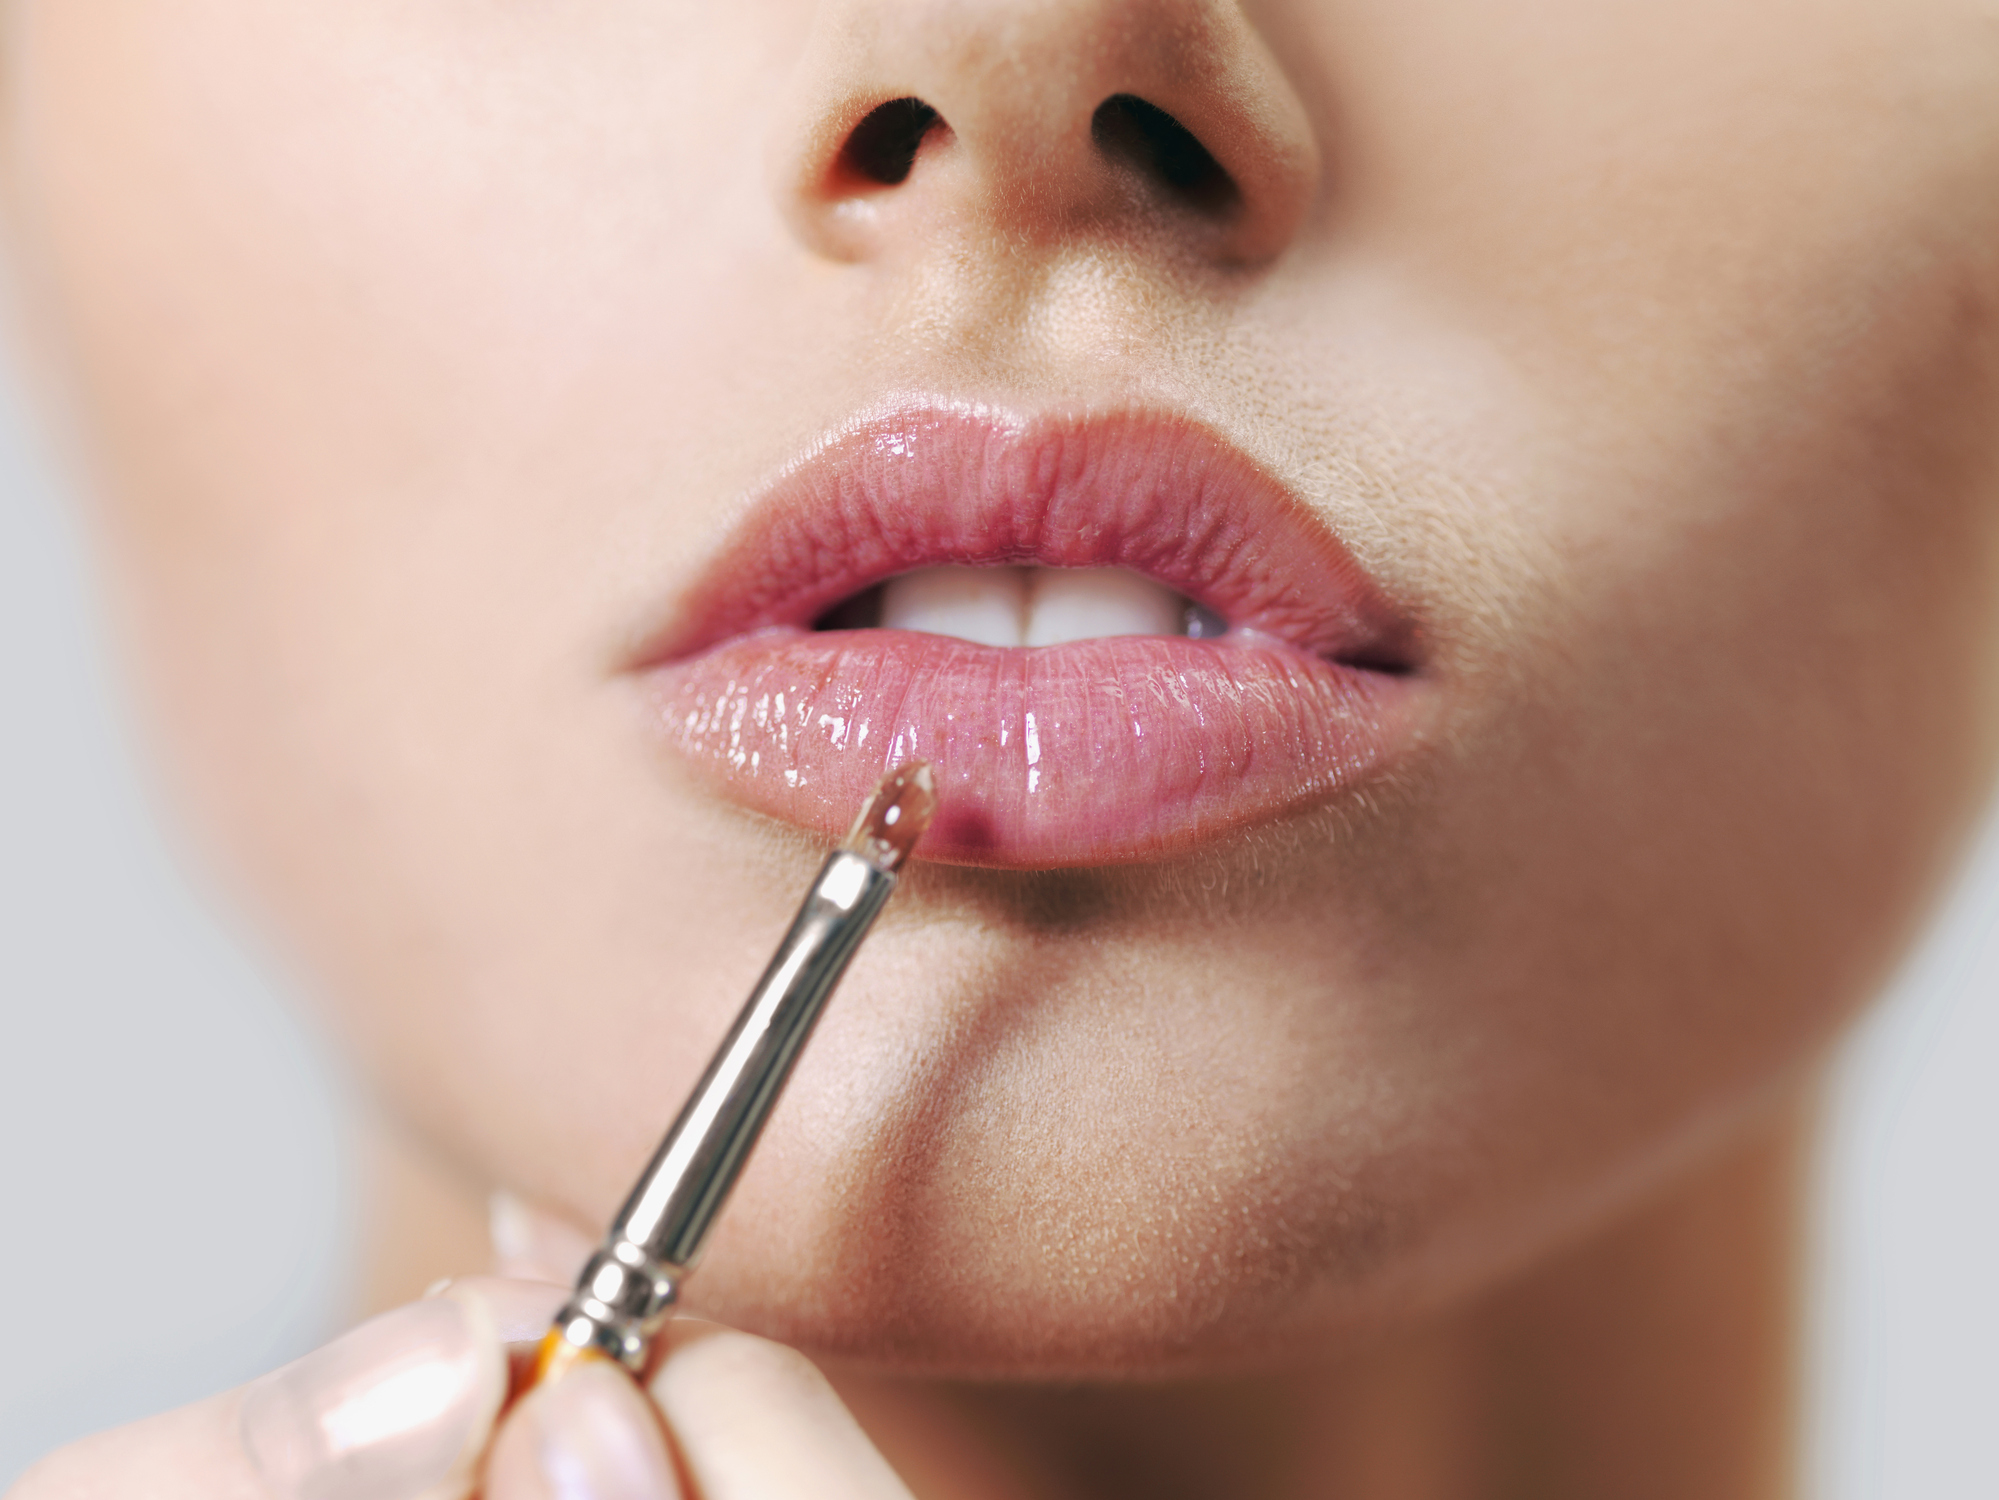 A woman applying lip gloss with a make-up brush, close-up of lips